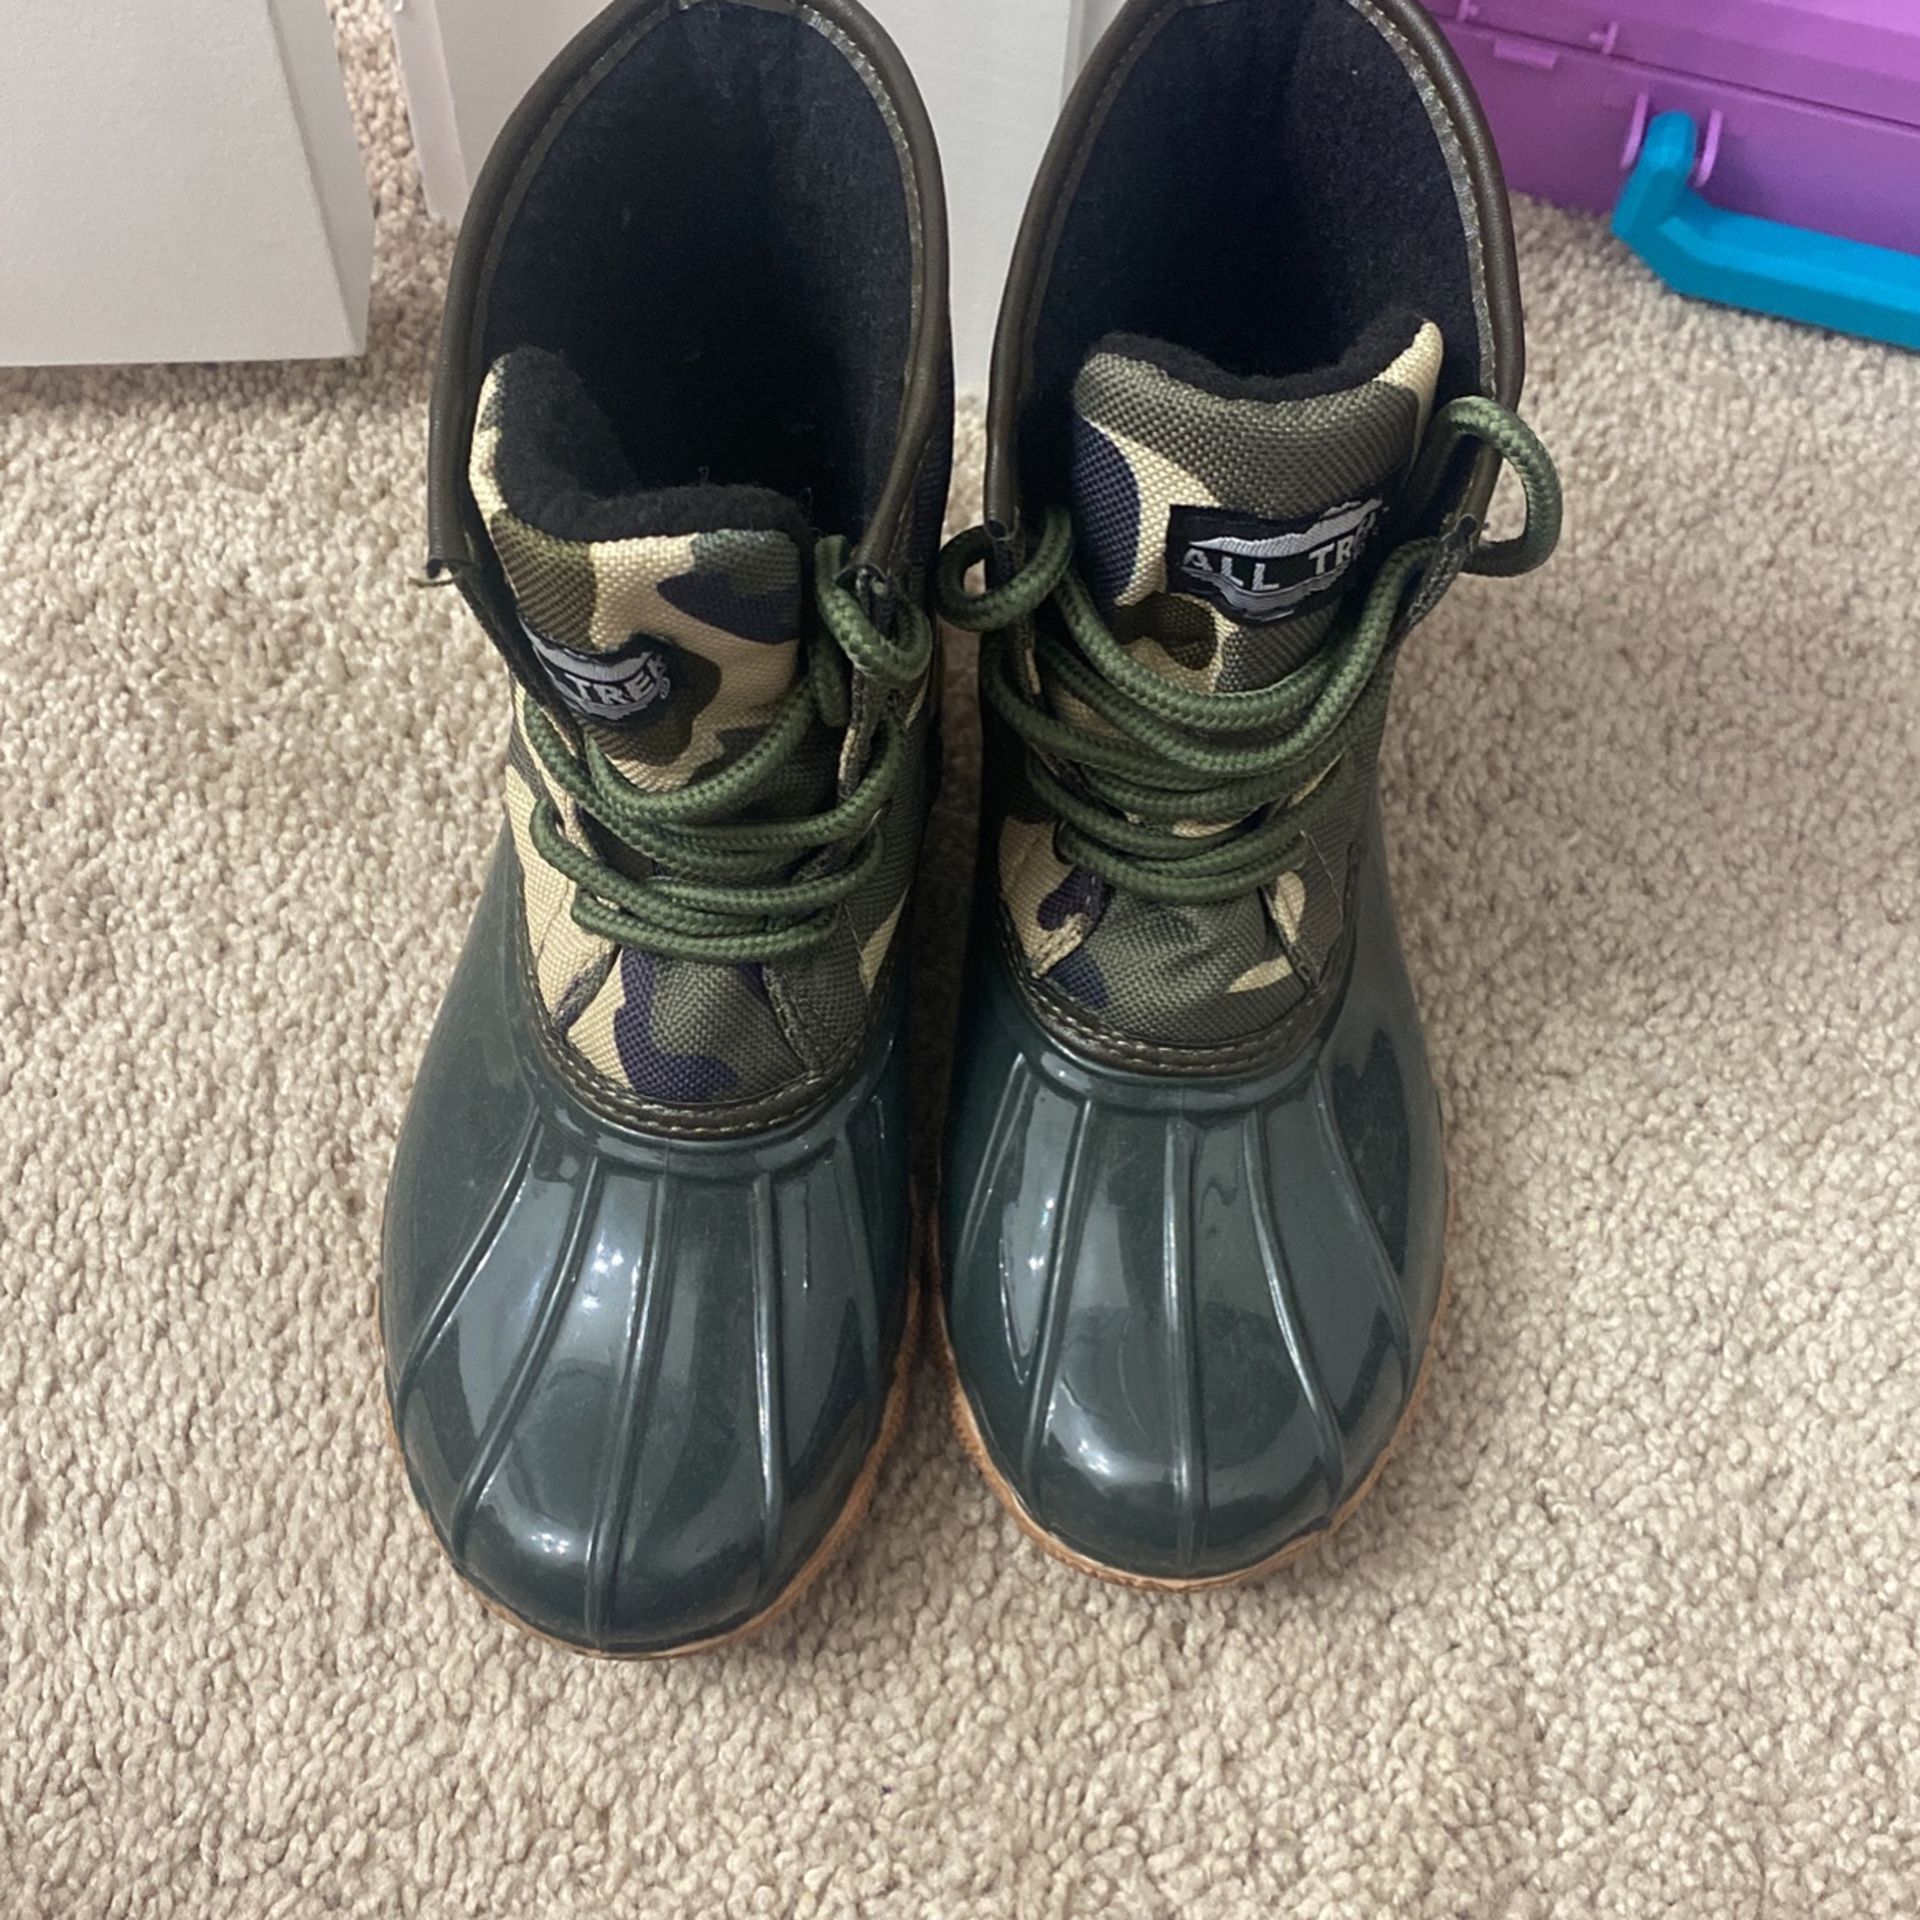 Snow Boots Size 13 Toddler 